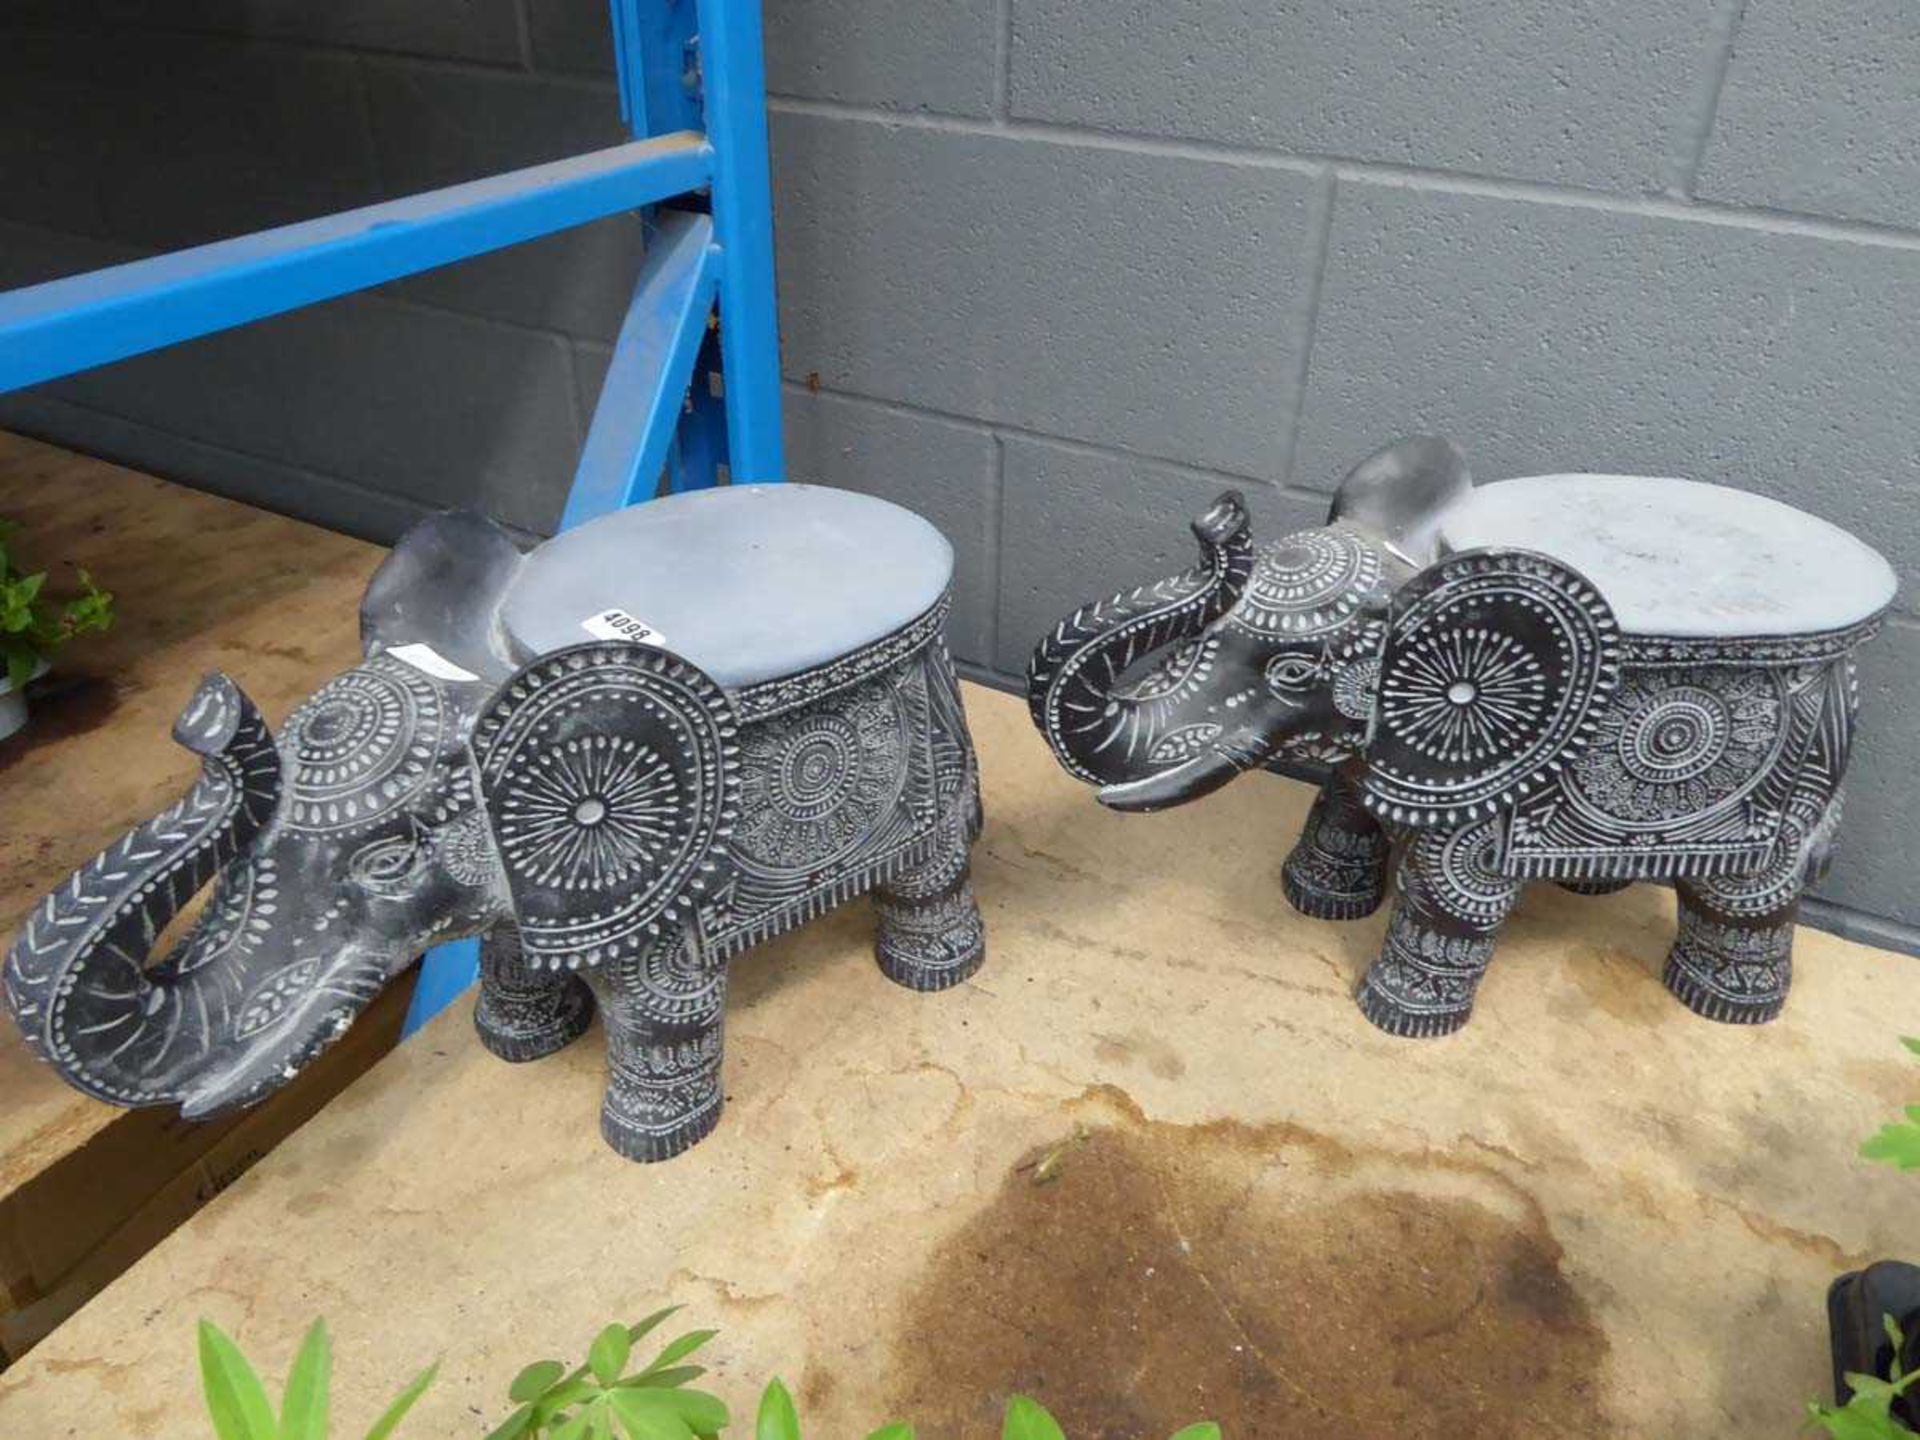 2 elephant plant stands